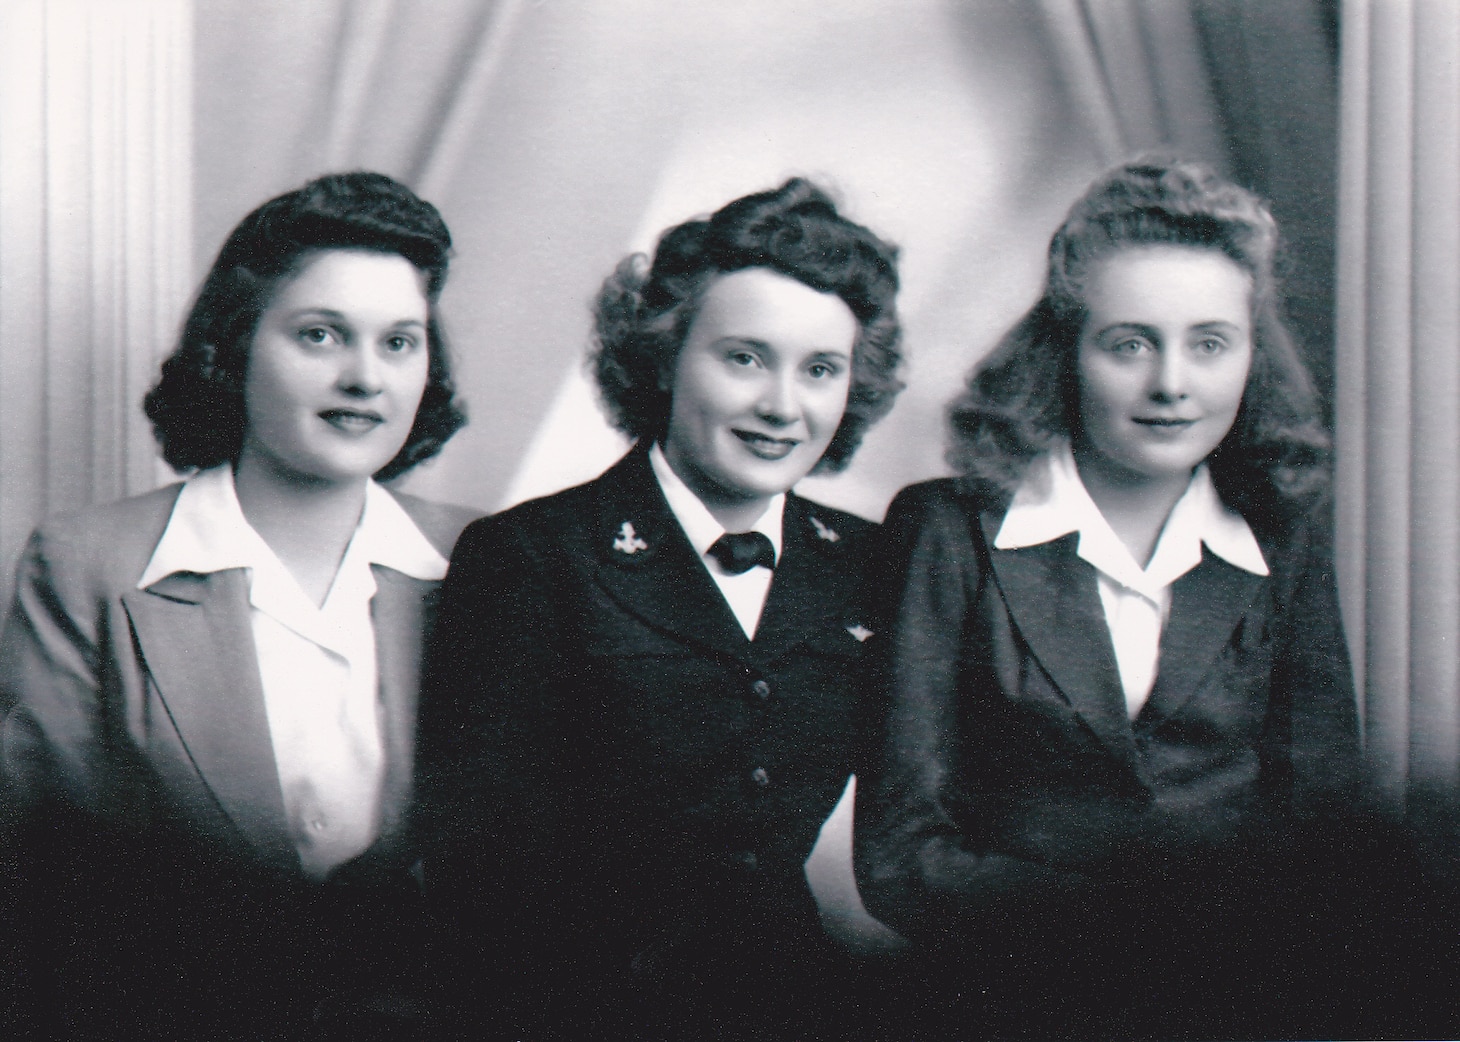 An undated portrait of Alice Starnes (center) with her sisters Nadia and Kathryn during World War II.